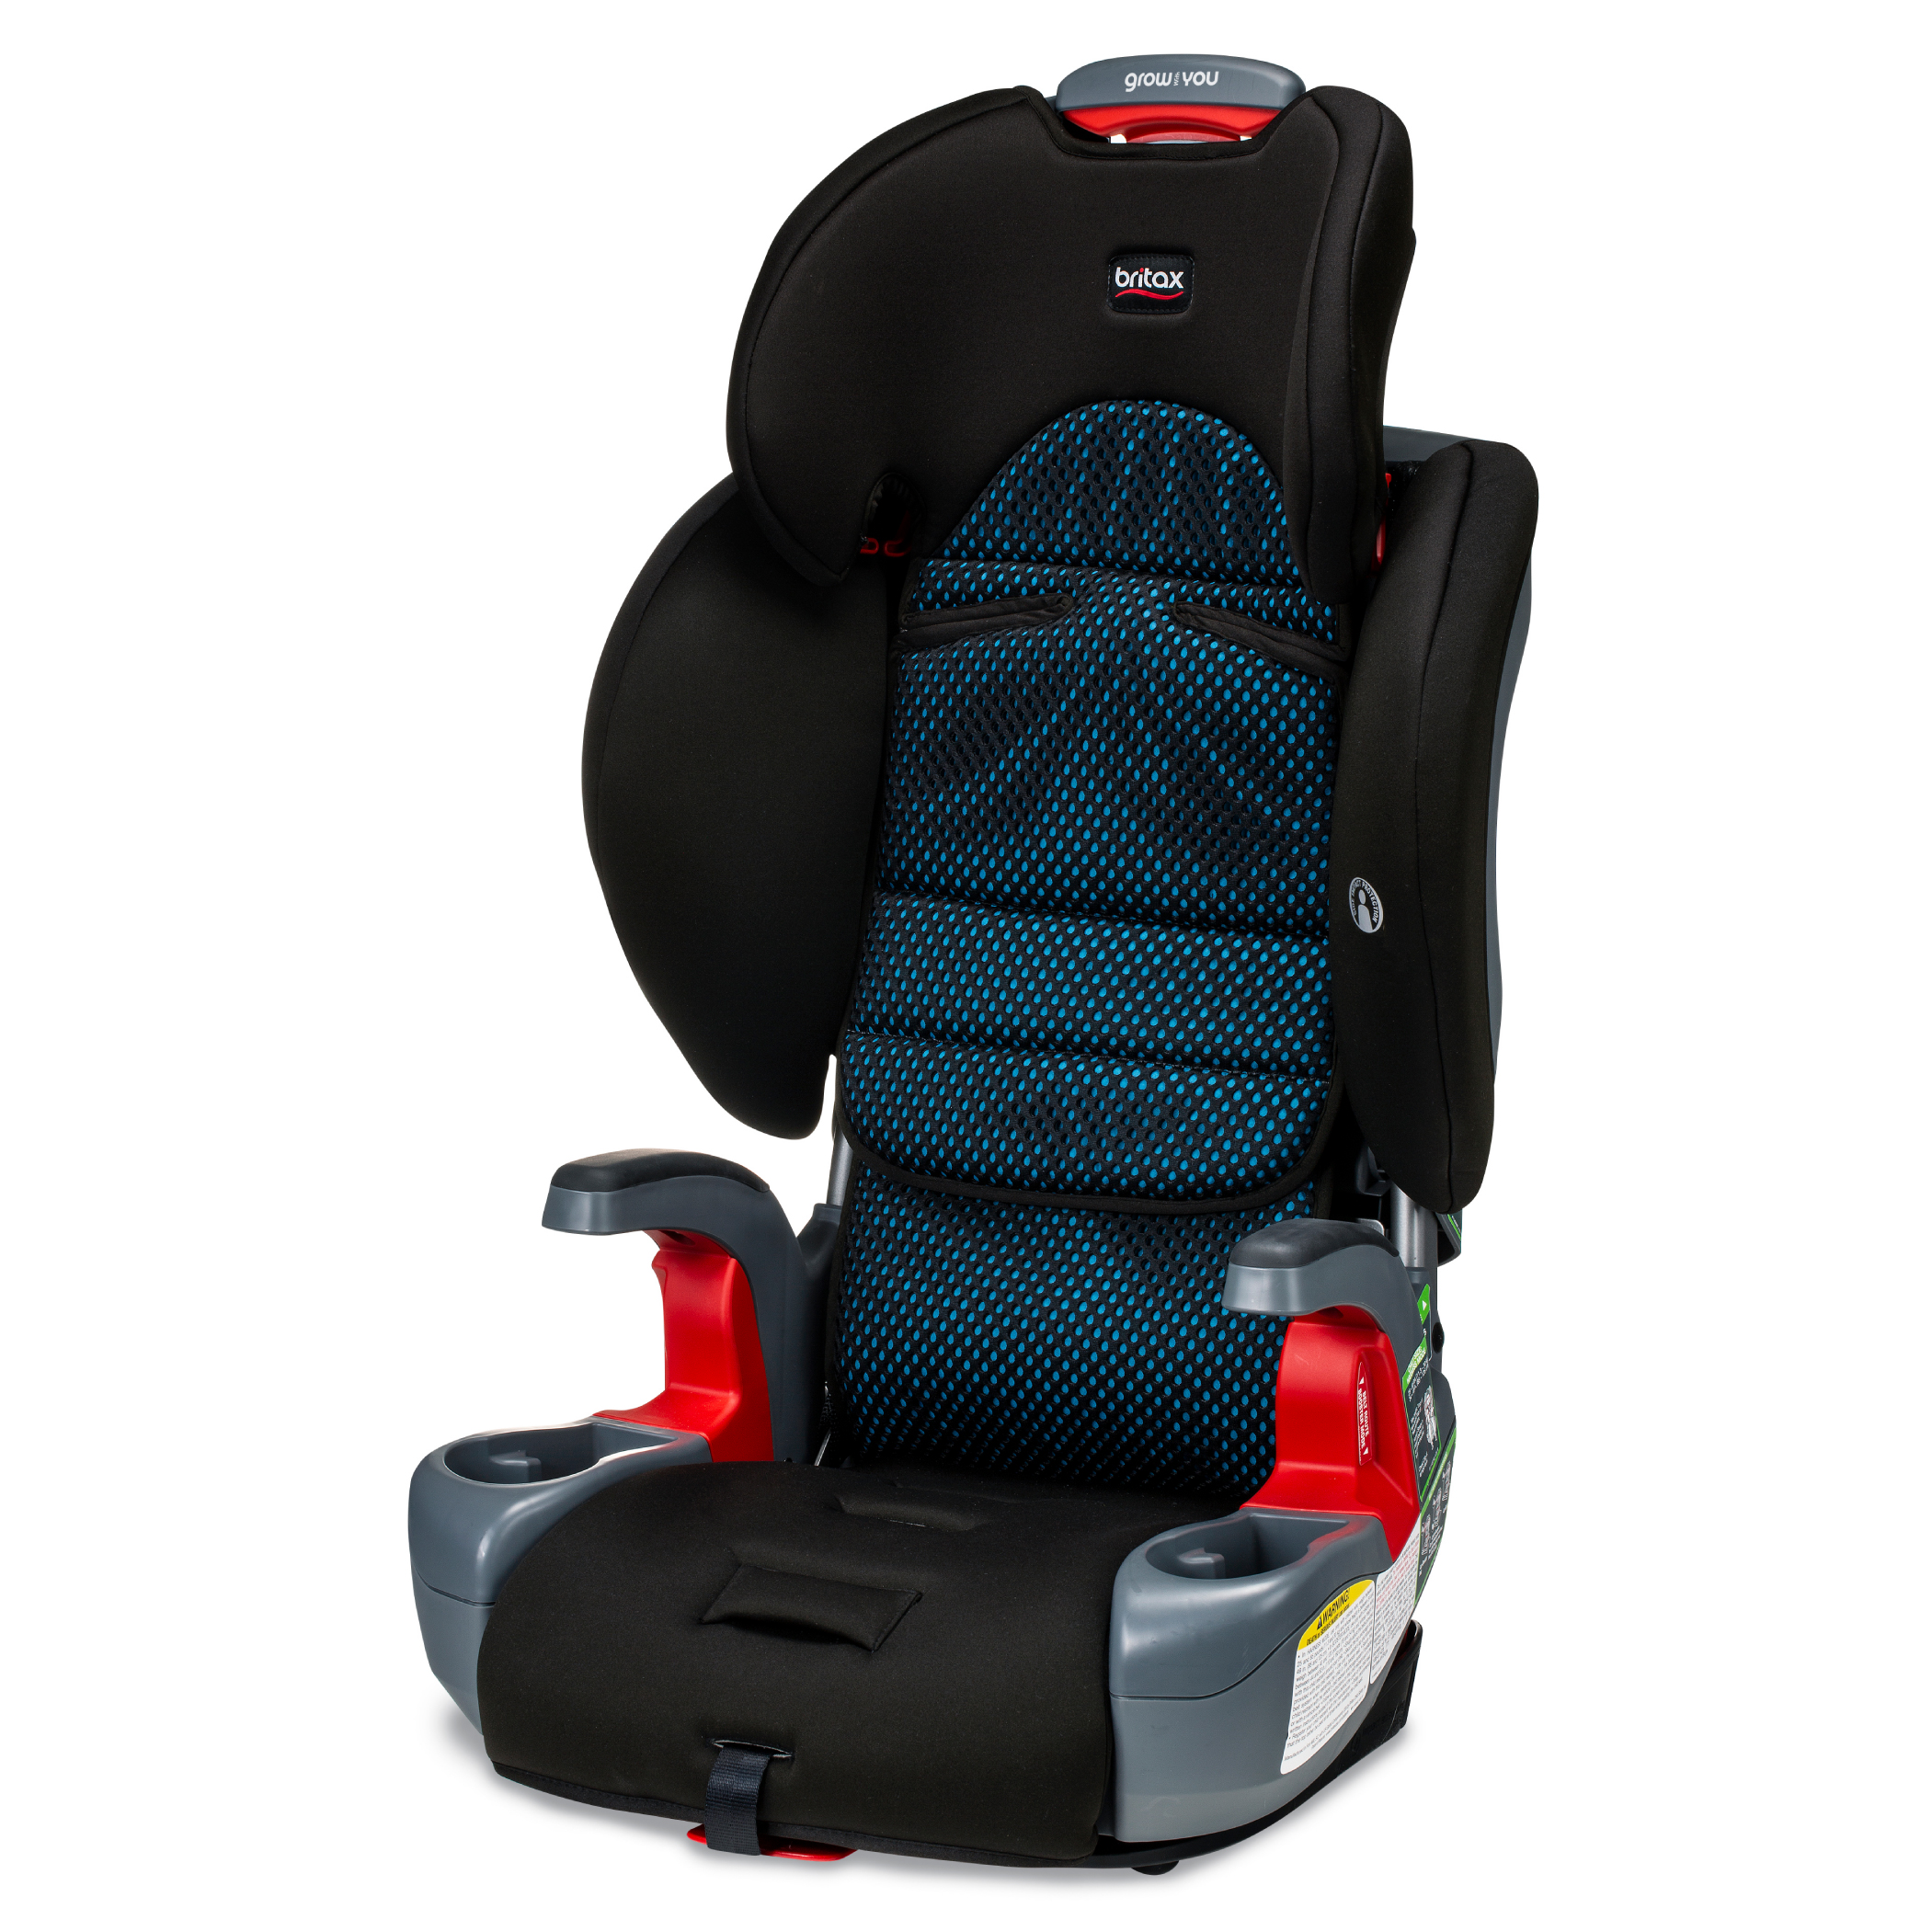 Britax Grow With You High-back Booster Car Seat, Black - image 3 of 13